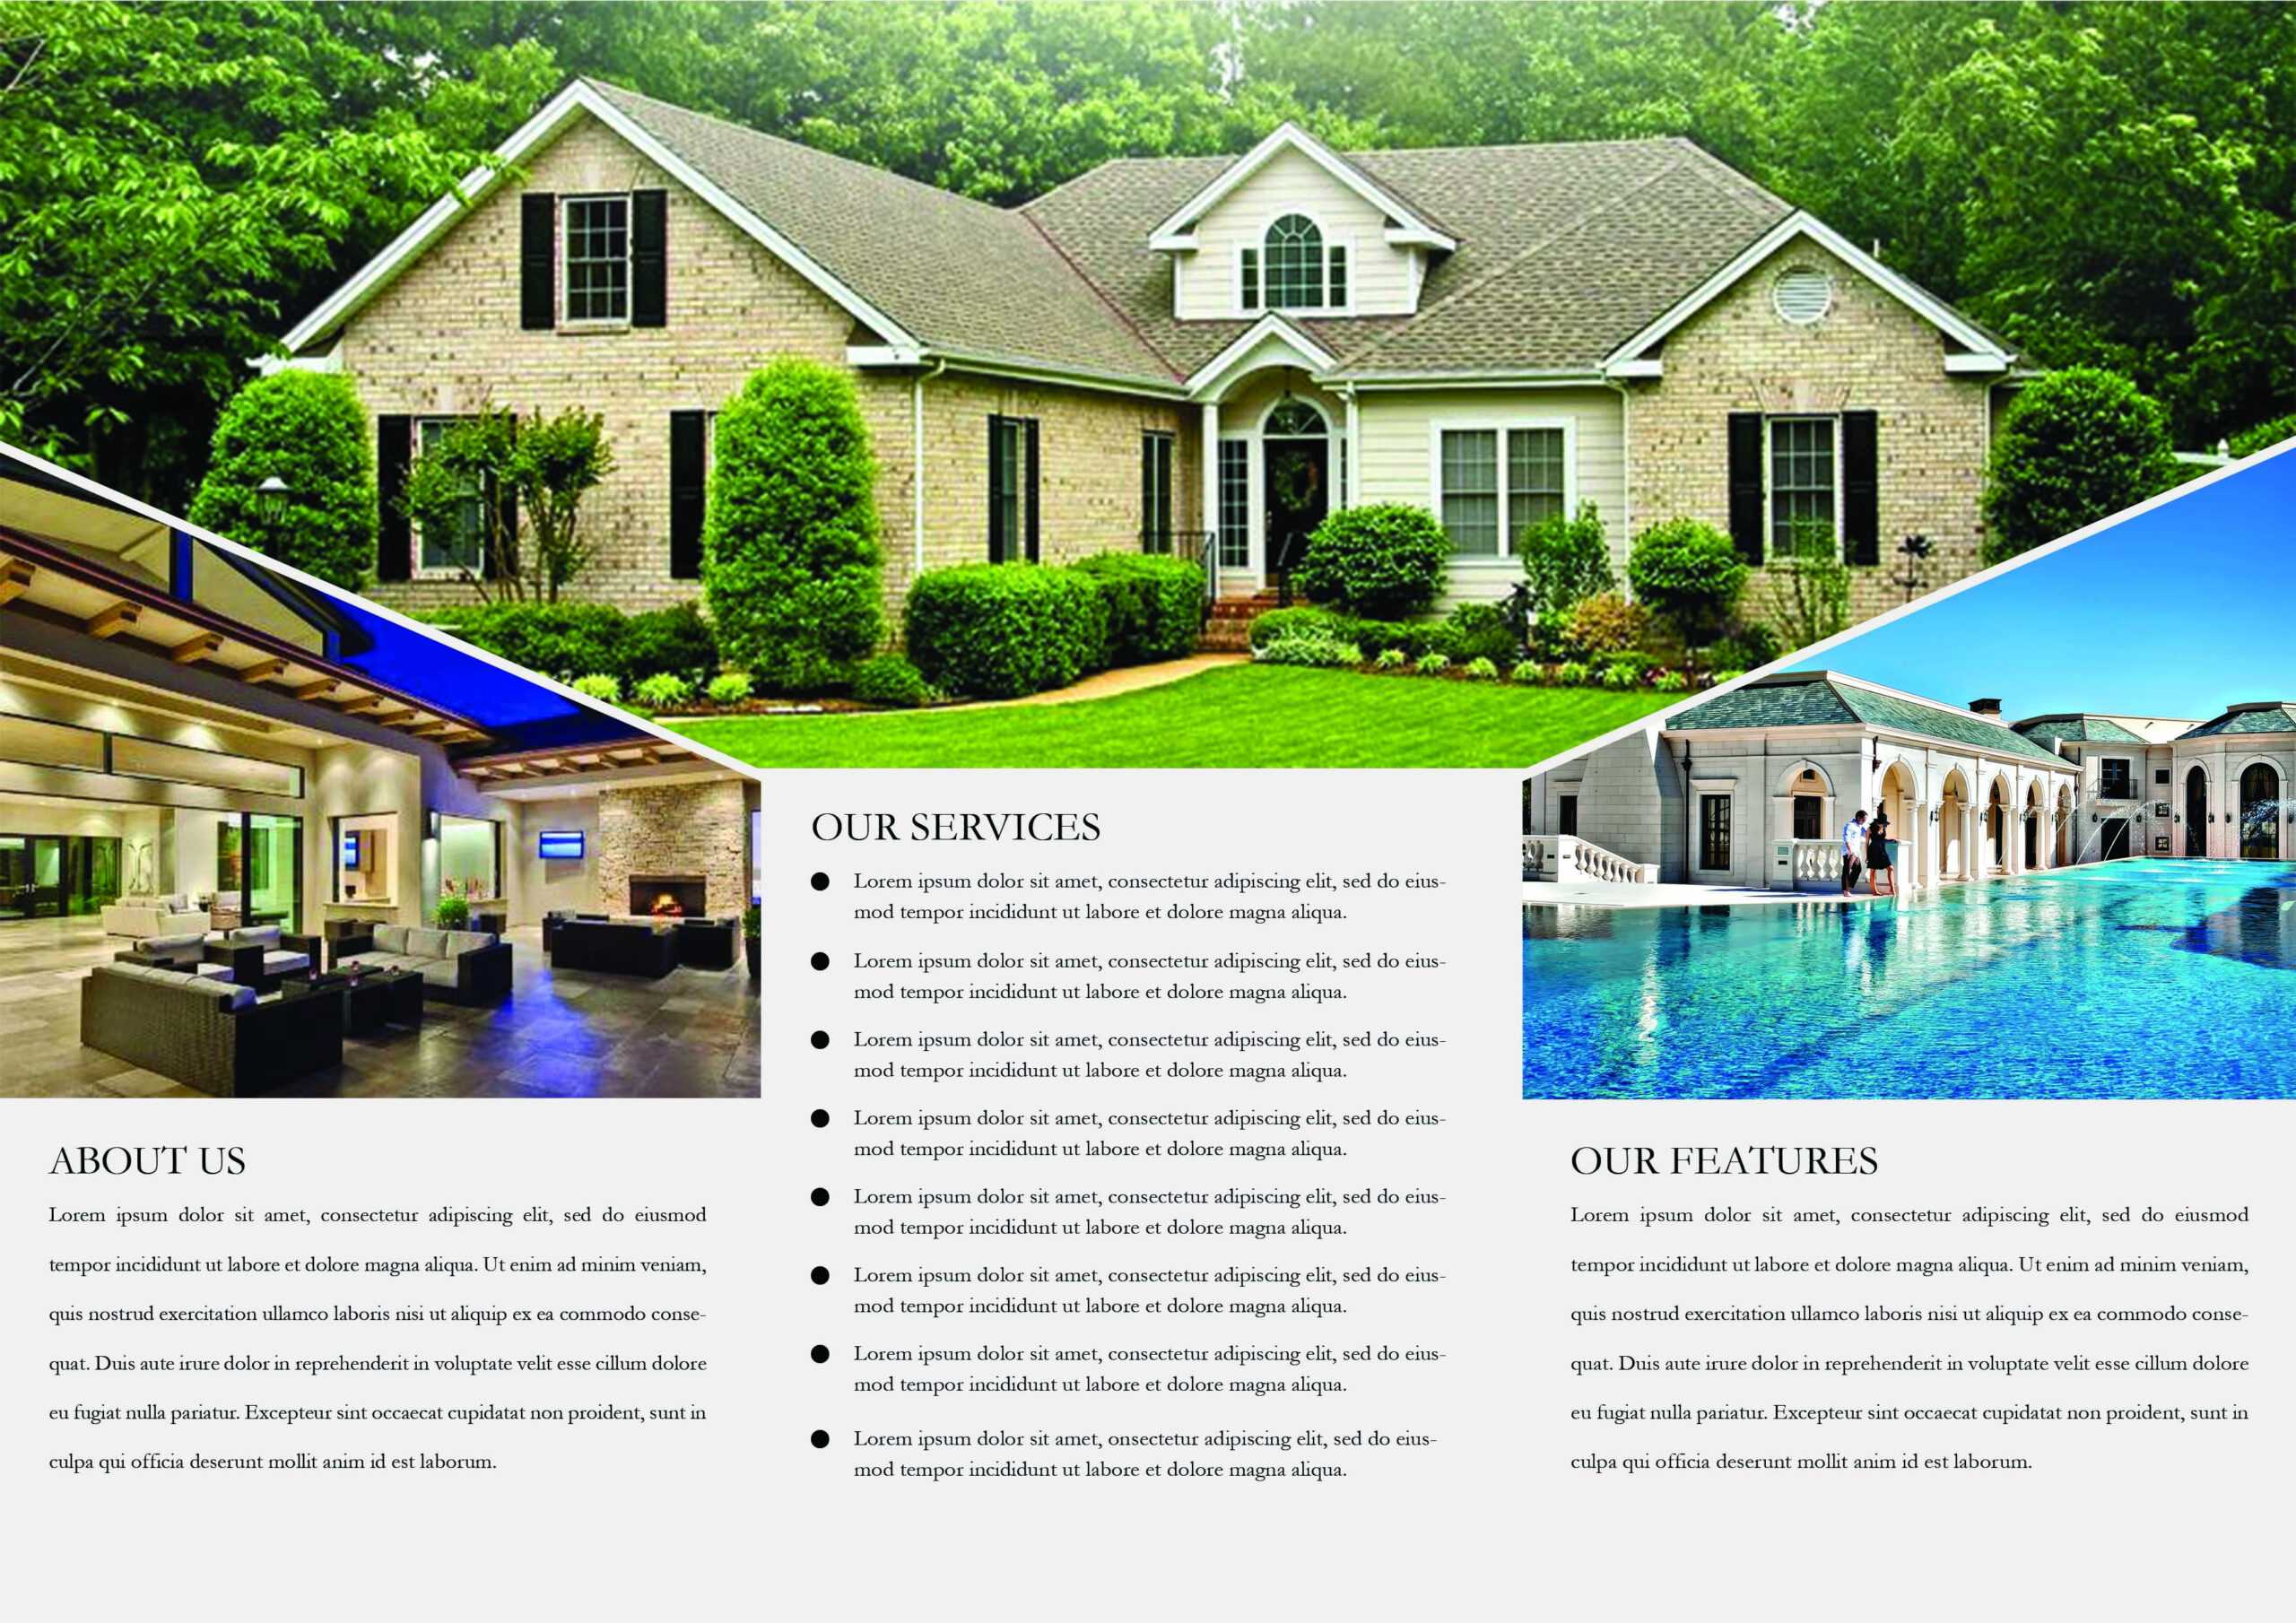 65+ Print Ready Brochure Templates Free Psd Indesign & Ai With Regard To Real Estate Brochure Templates Psd Free Download